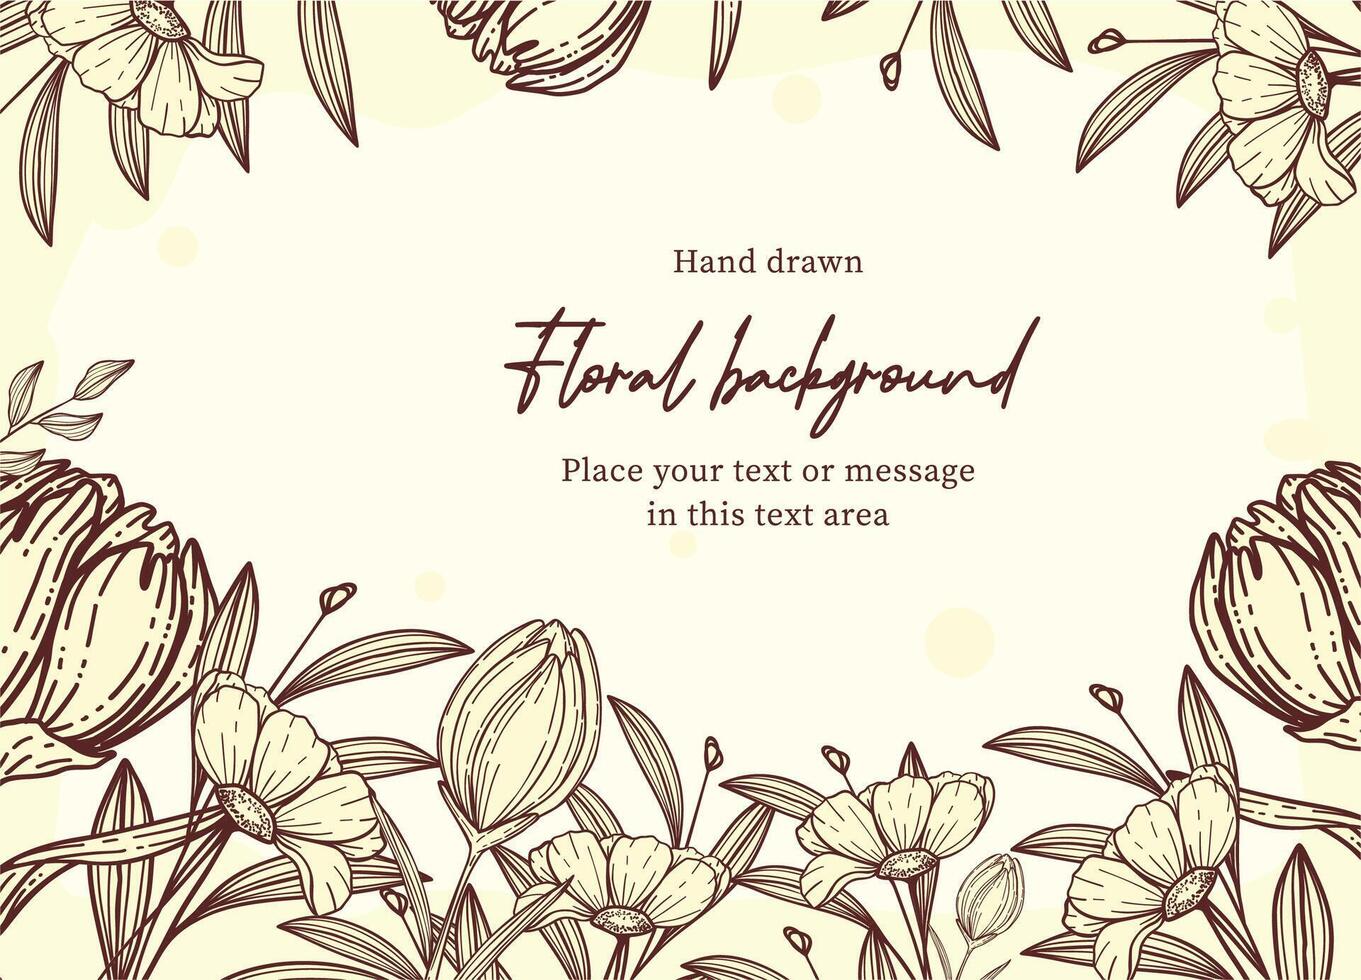 Retro linear engraved flower background with text vector